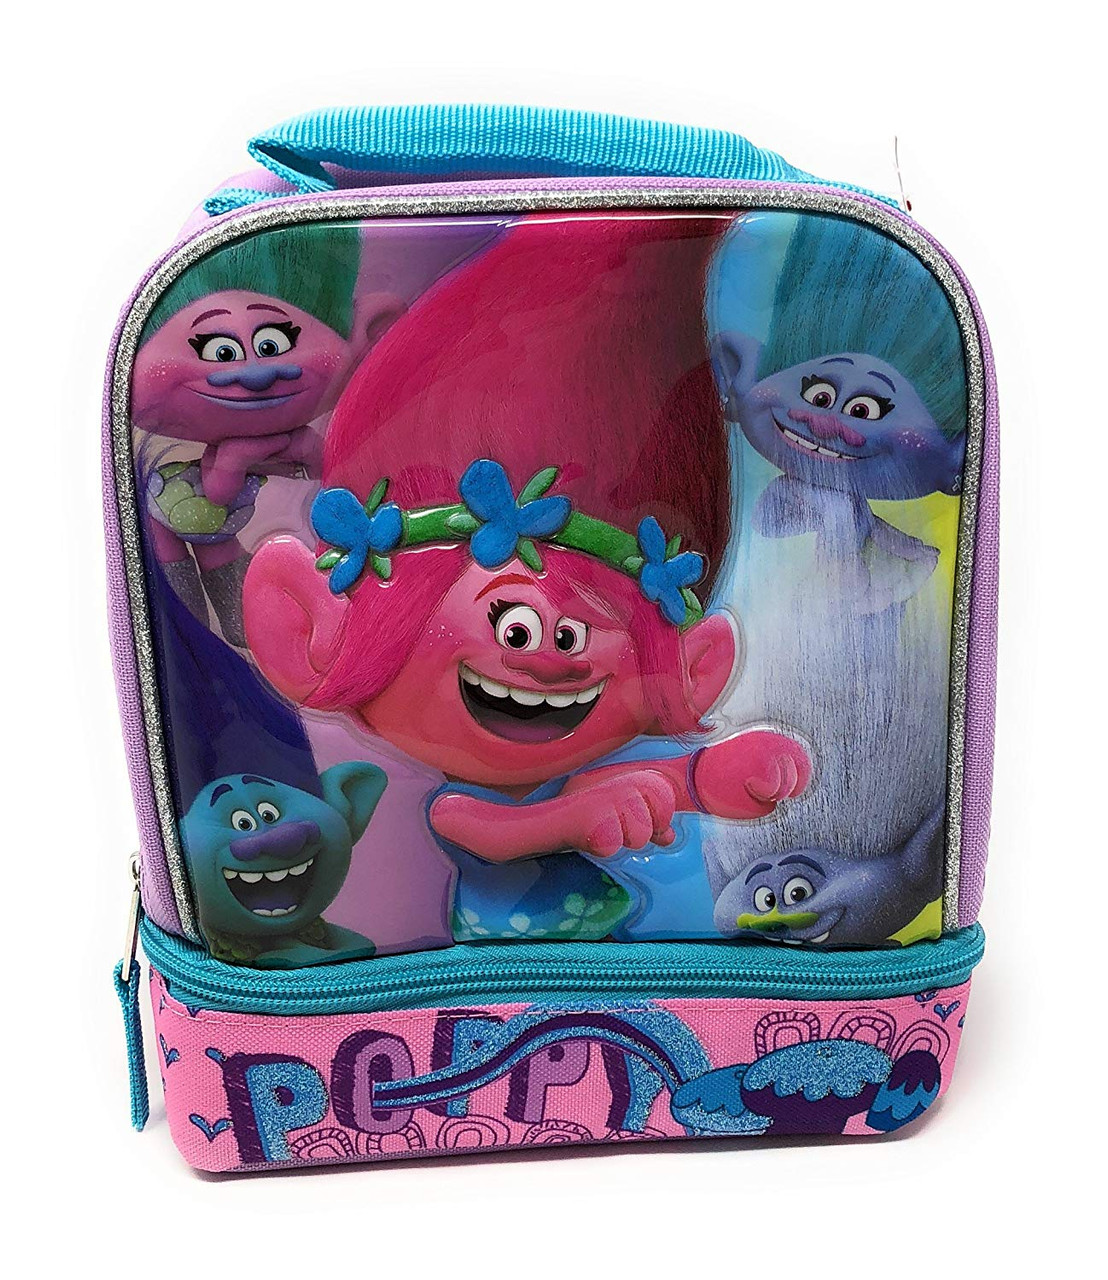 Sale Mermaid Backpack Set with Lunch Box Fun 3 in 1 Bookbag Lunch Bag  Pencil Case